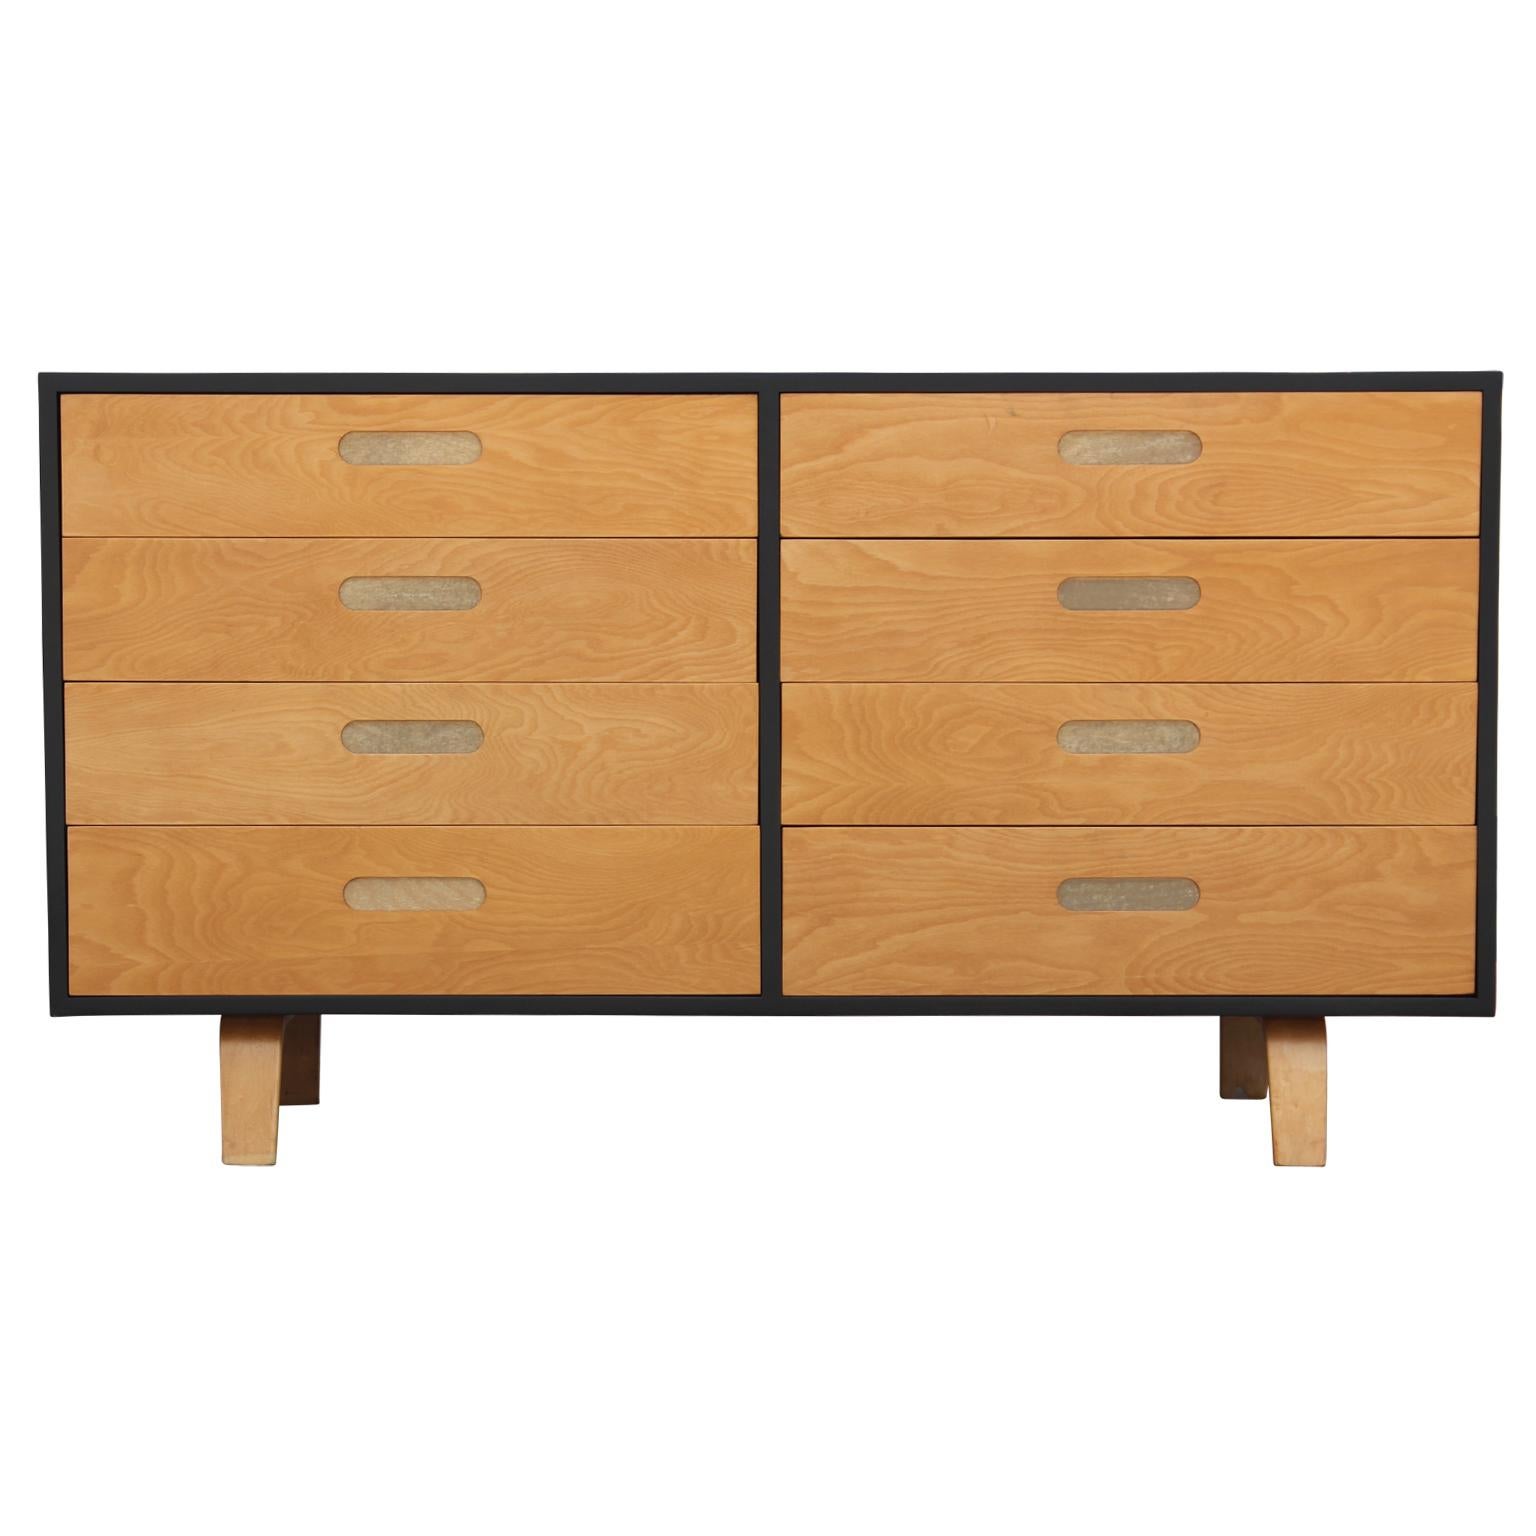 Unique and intriguing eight drawer dresser made from birch wood and refinished to be two-toned with fun spring loaded recessed pulls by Clifford Pascoe.